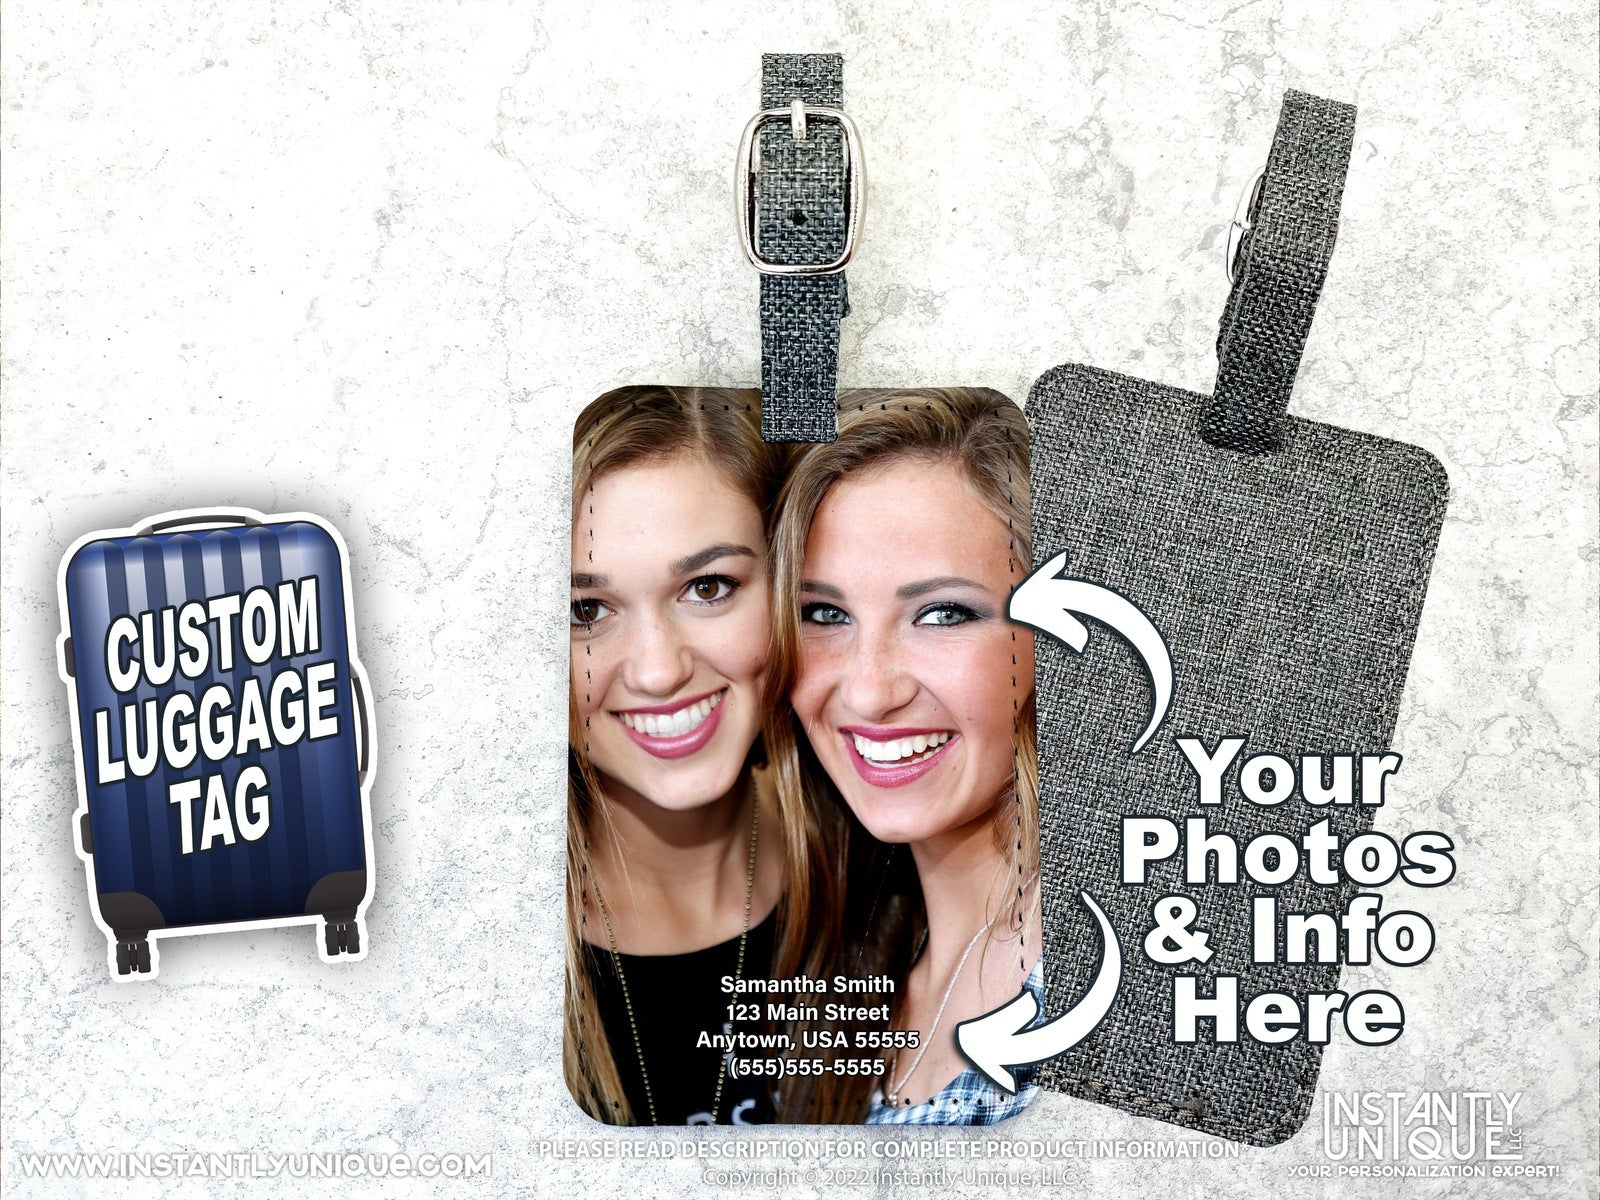 Personalized Luggage Tag - Add your photo